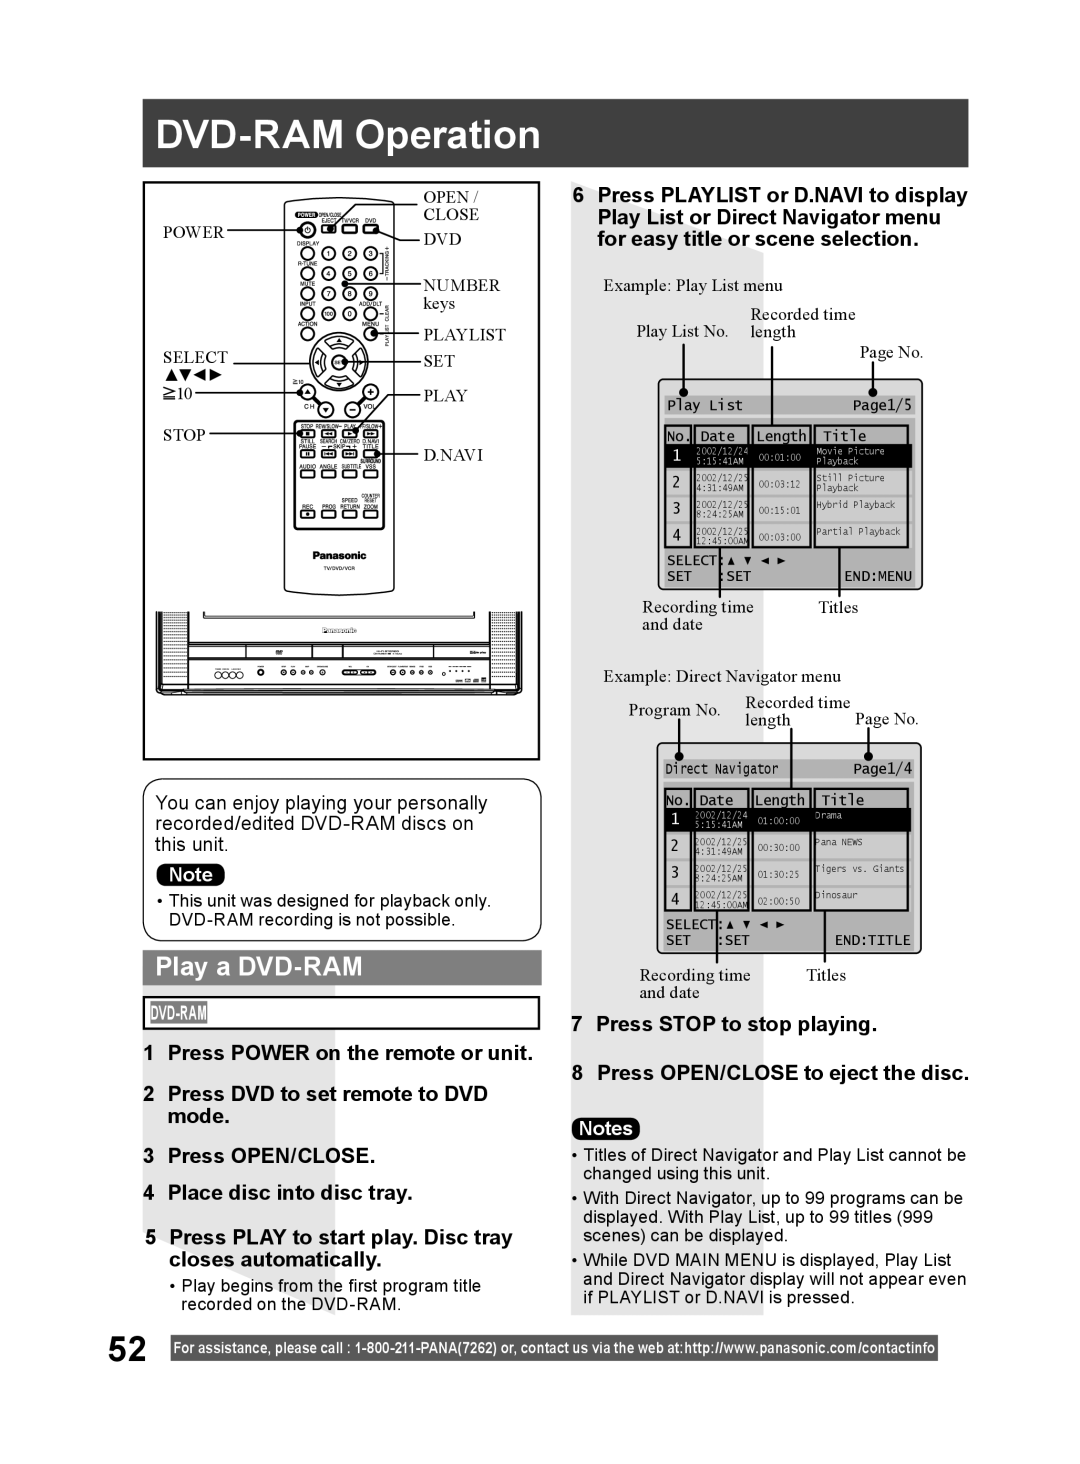 Panasonic PV DF2004 manual DVD-RAM Operation, Play a DVD-RAM, Press POWER on the remote or unit, Place disc into disc tray 